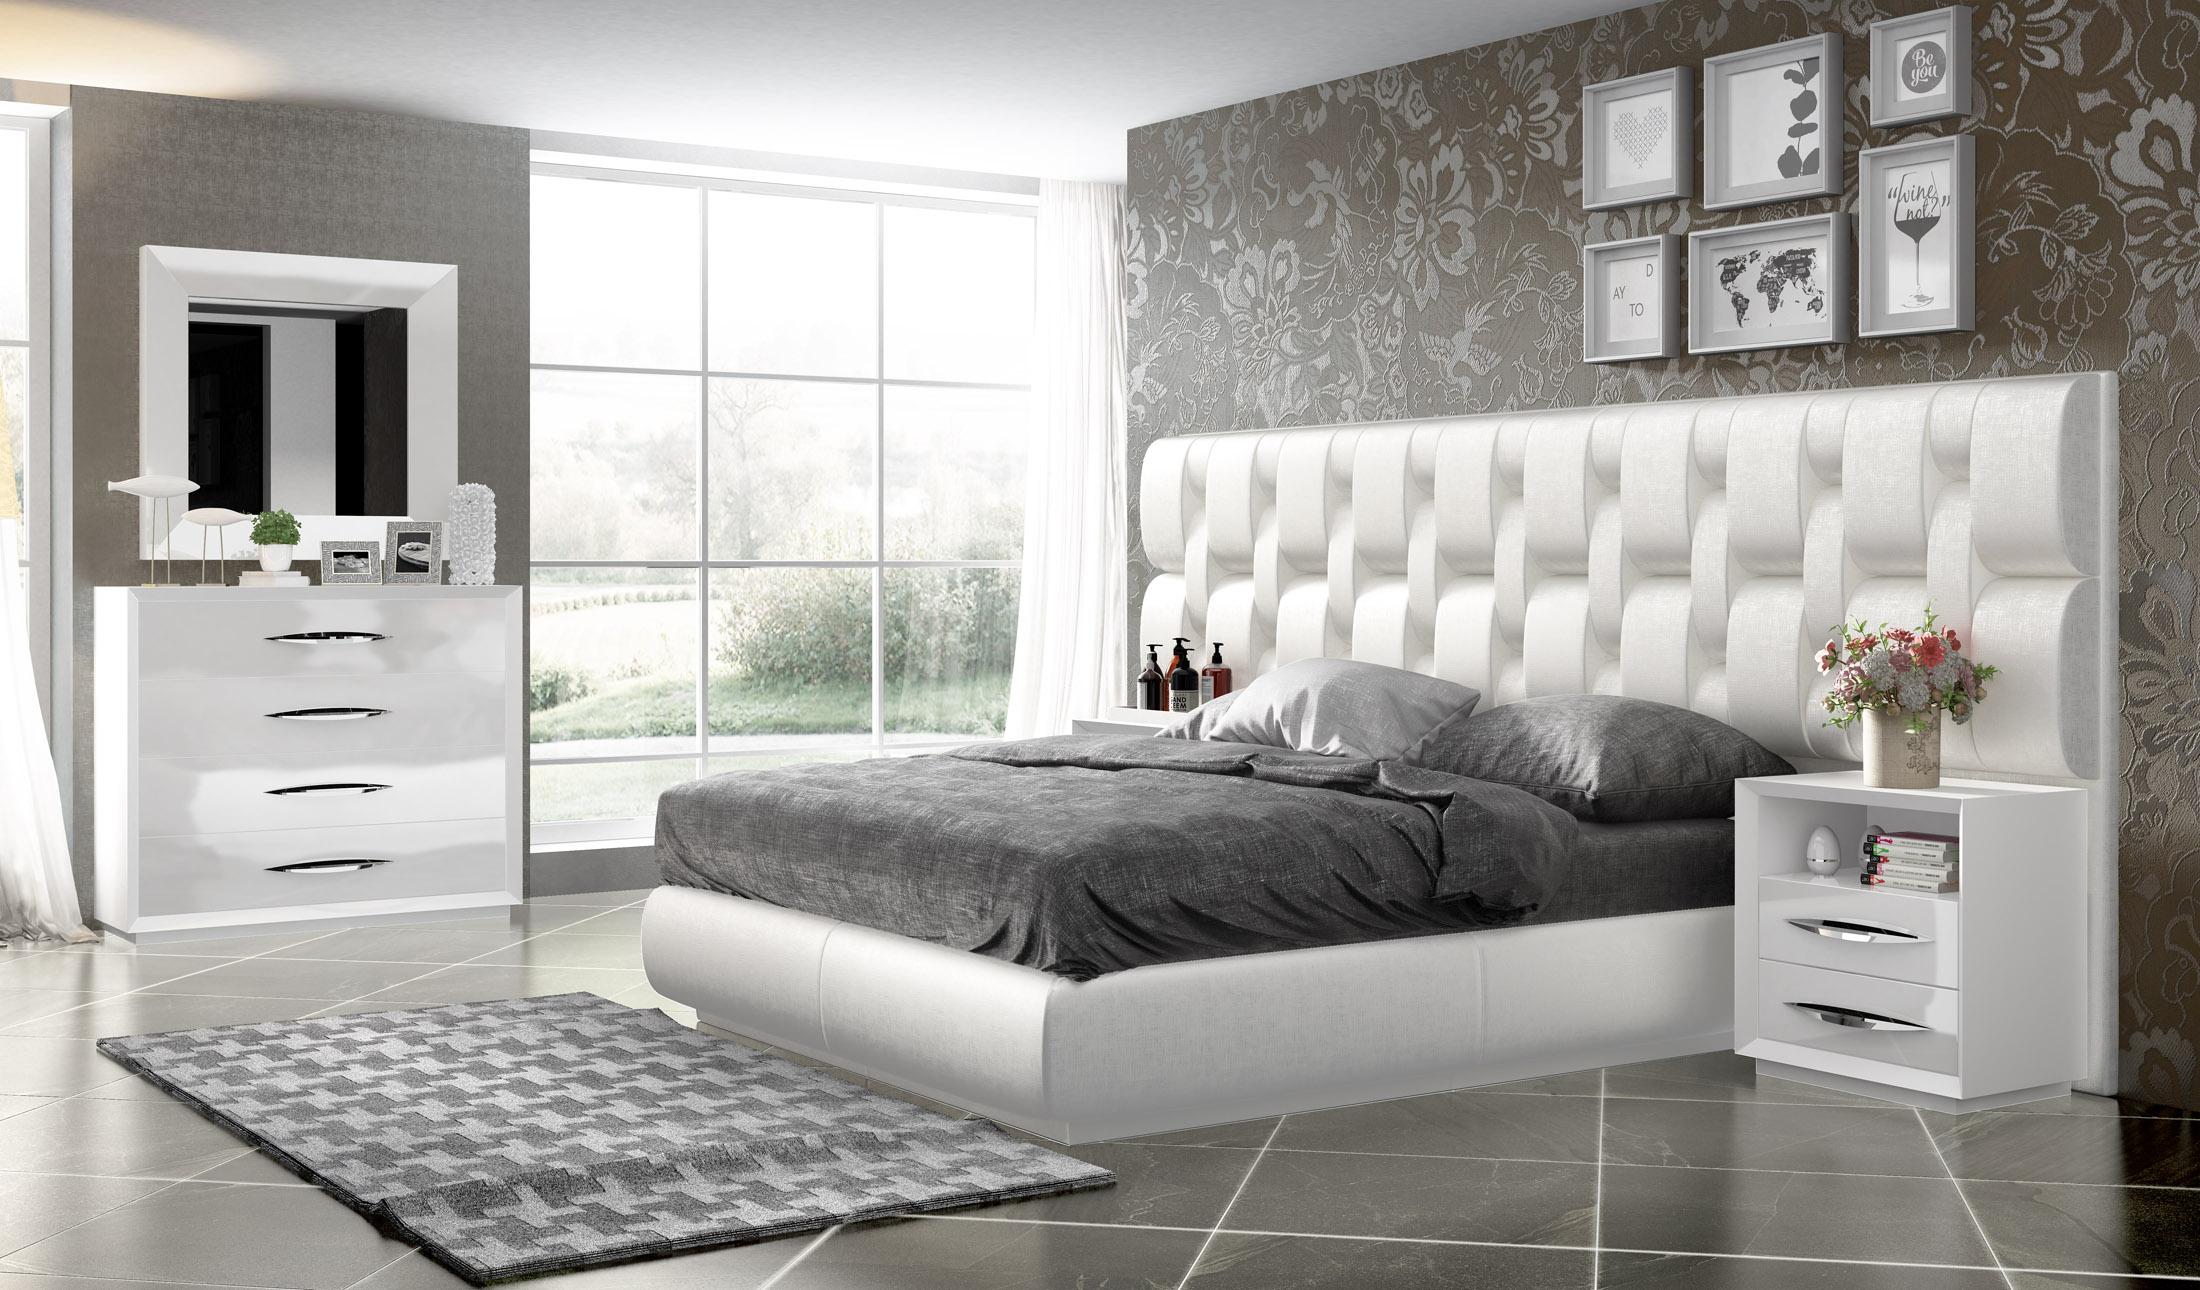 

    
Glam Glossy White King Bedroom Set 3Pcs MADE IN SPAIN Contemporary ESF Emporio
